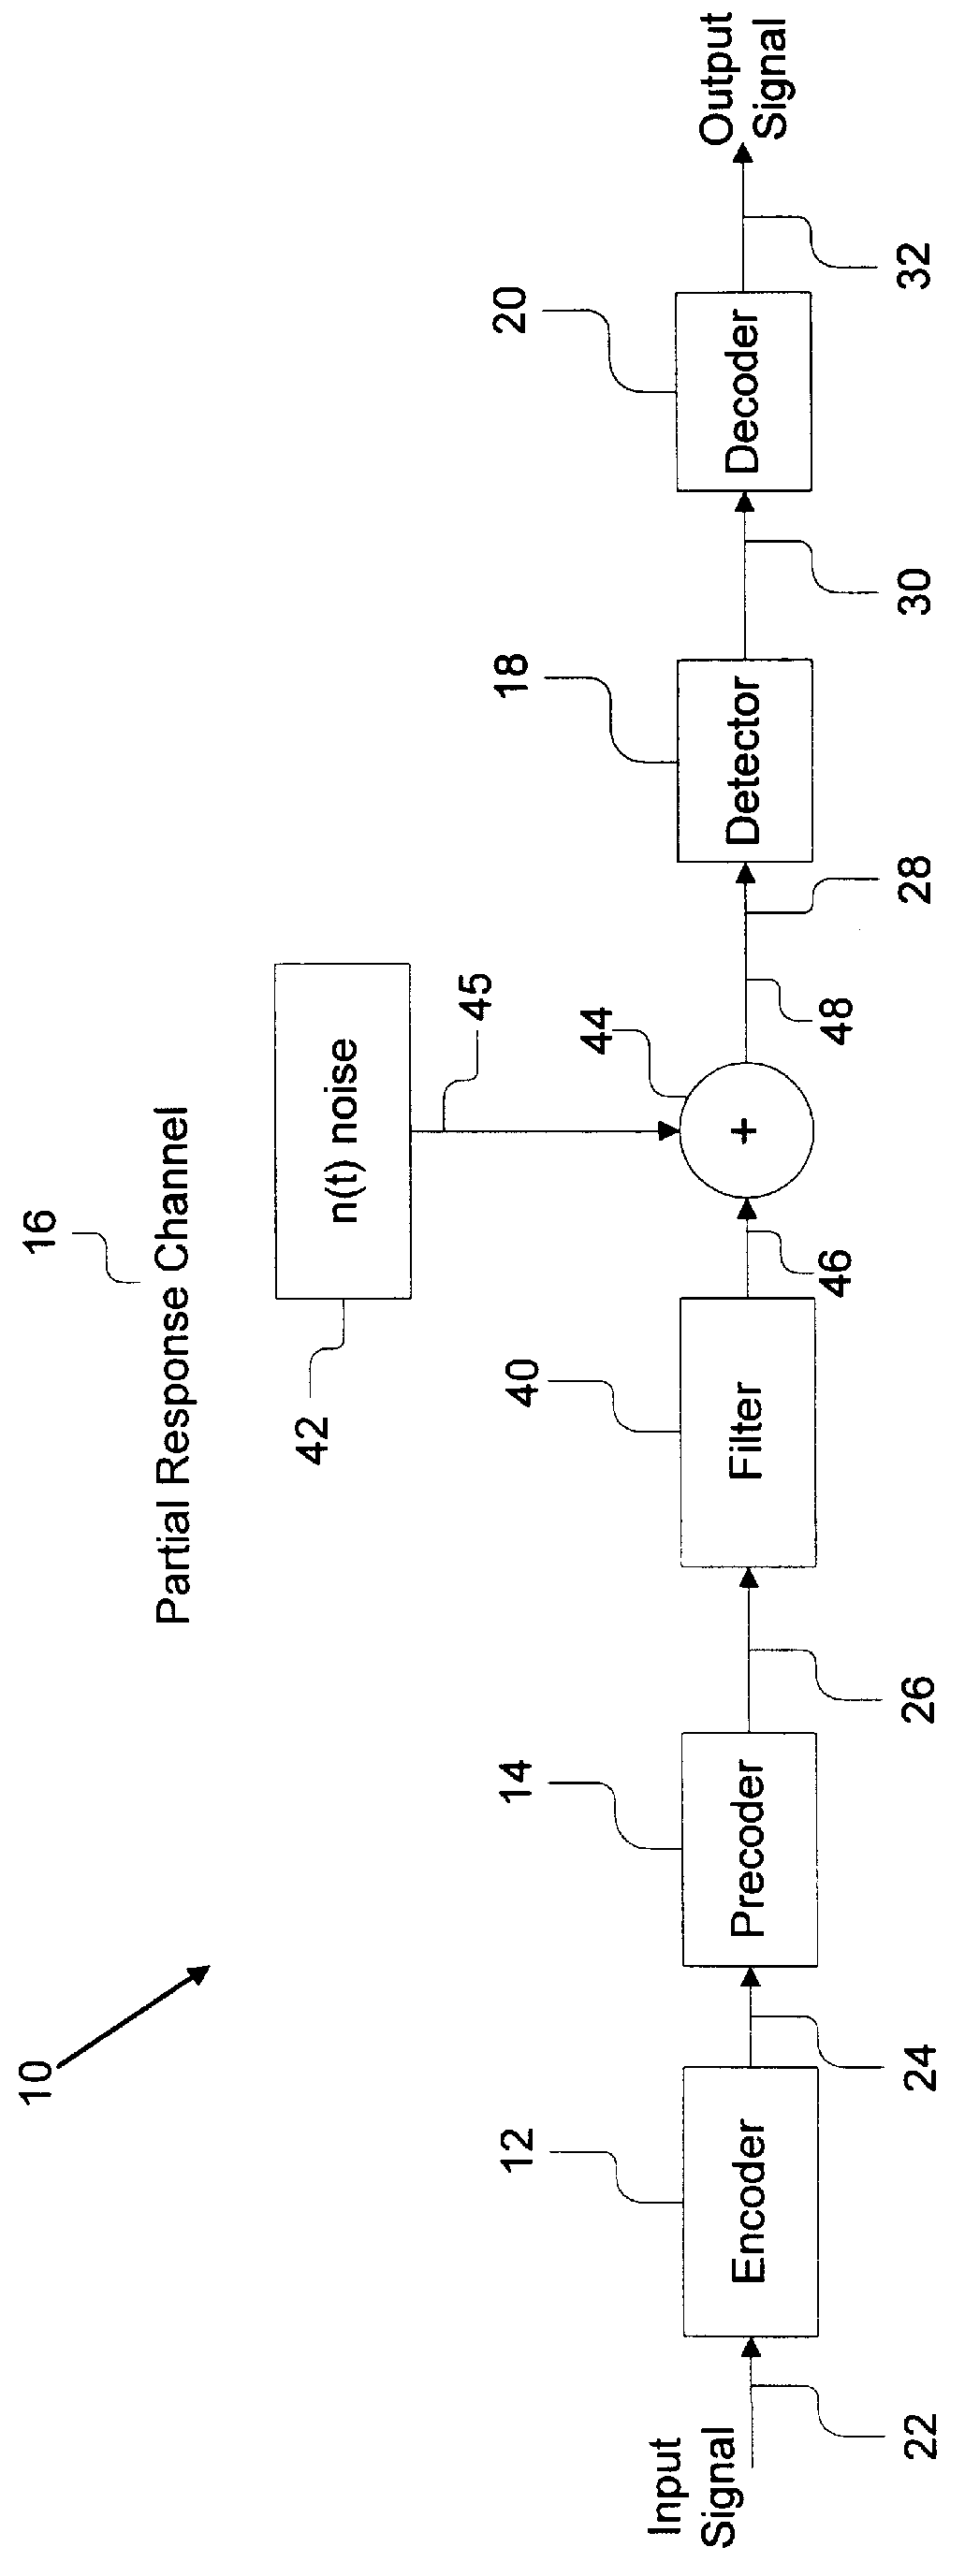 System and method for generating many ones codes with hamming distance after precoding